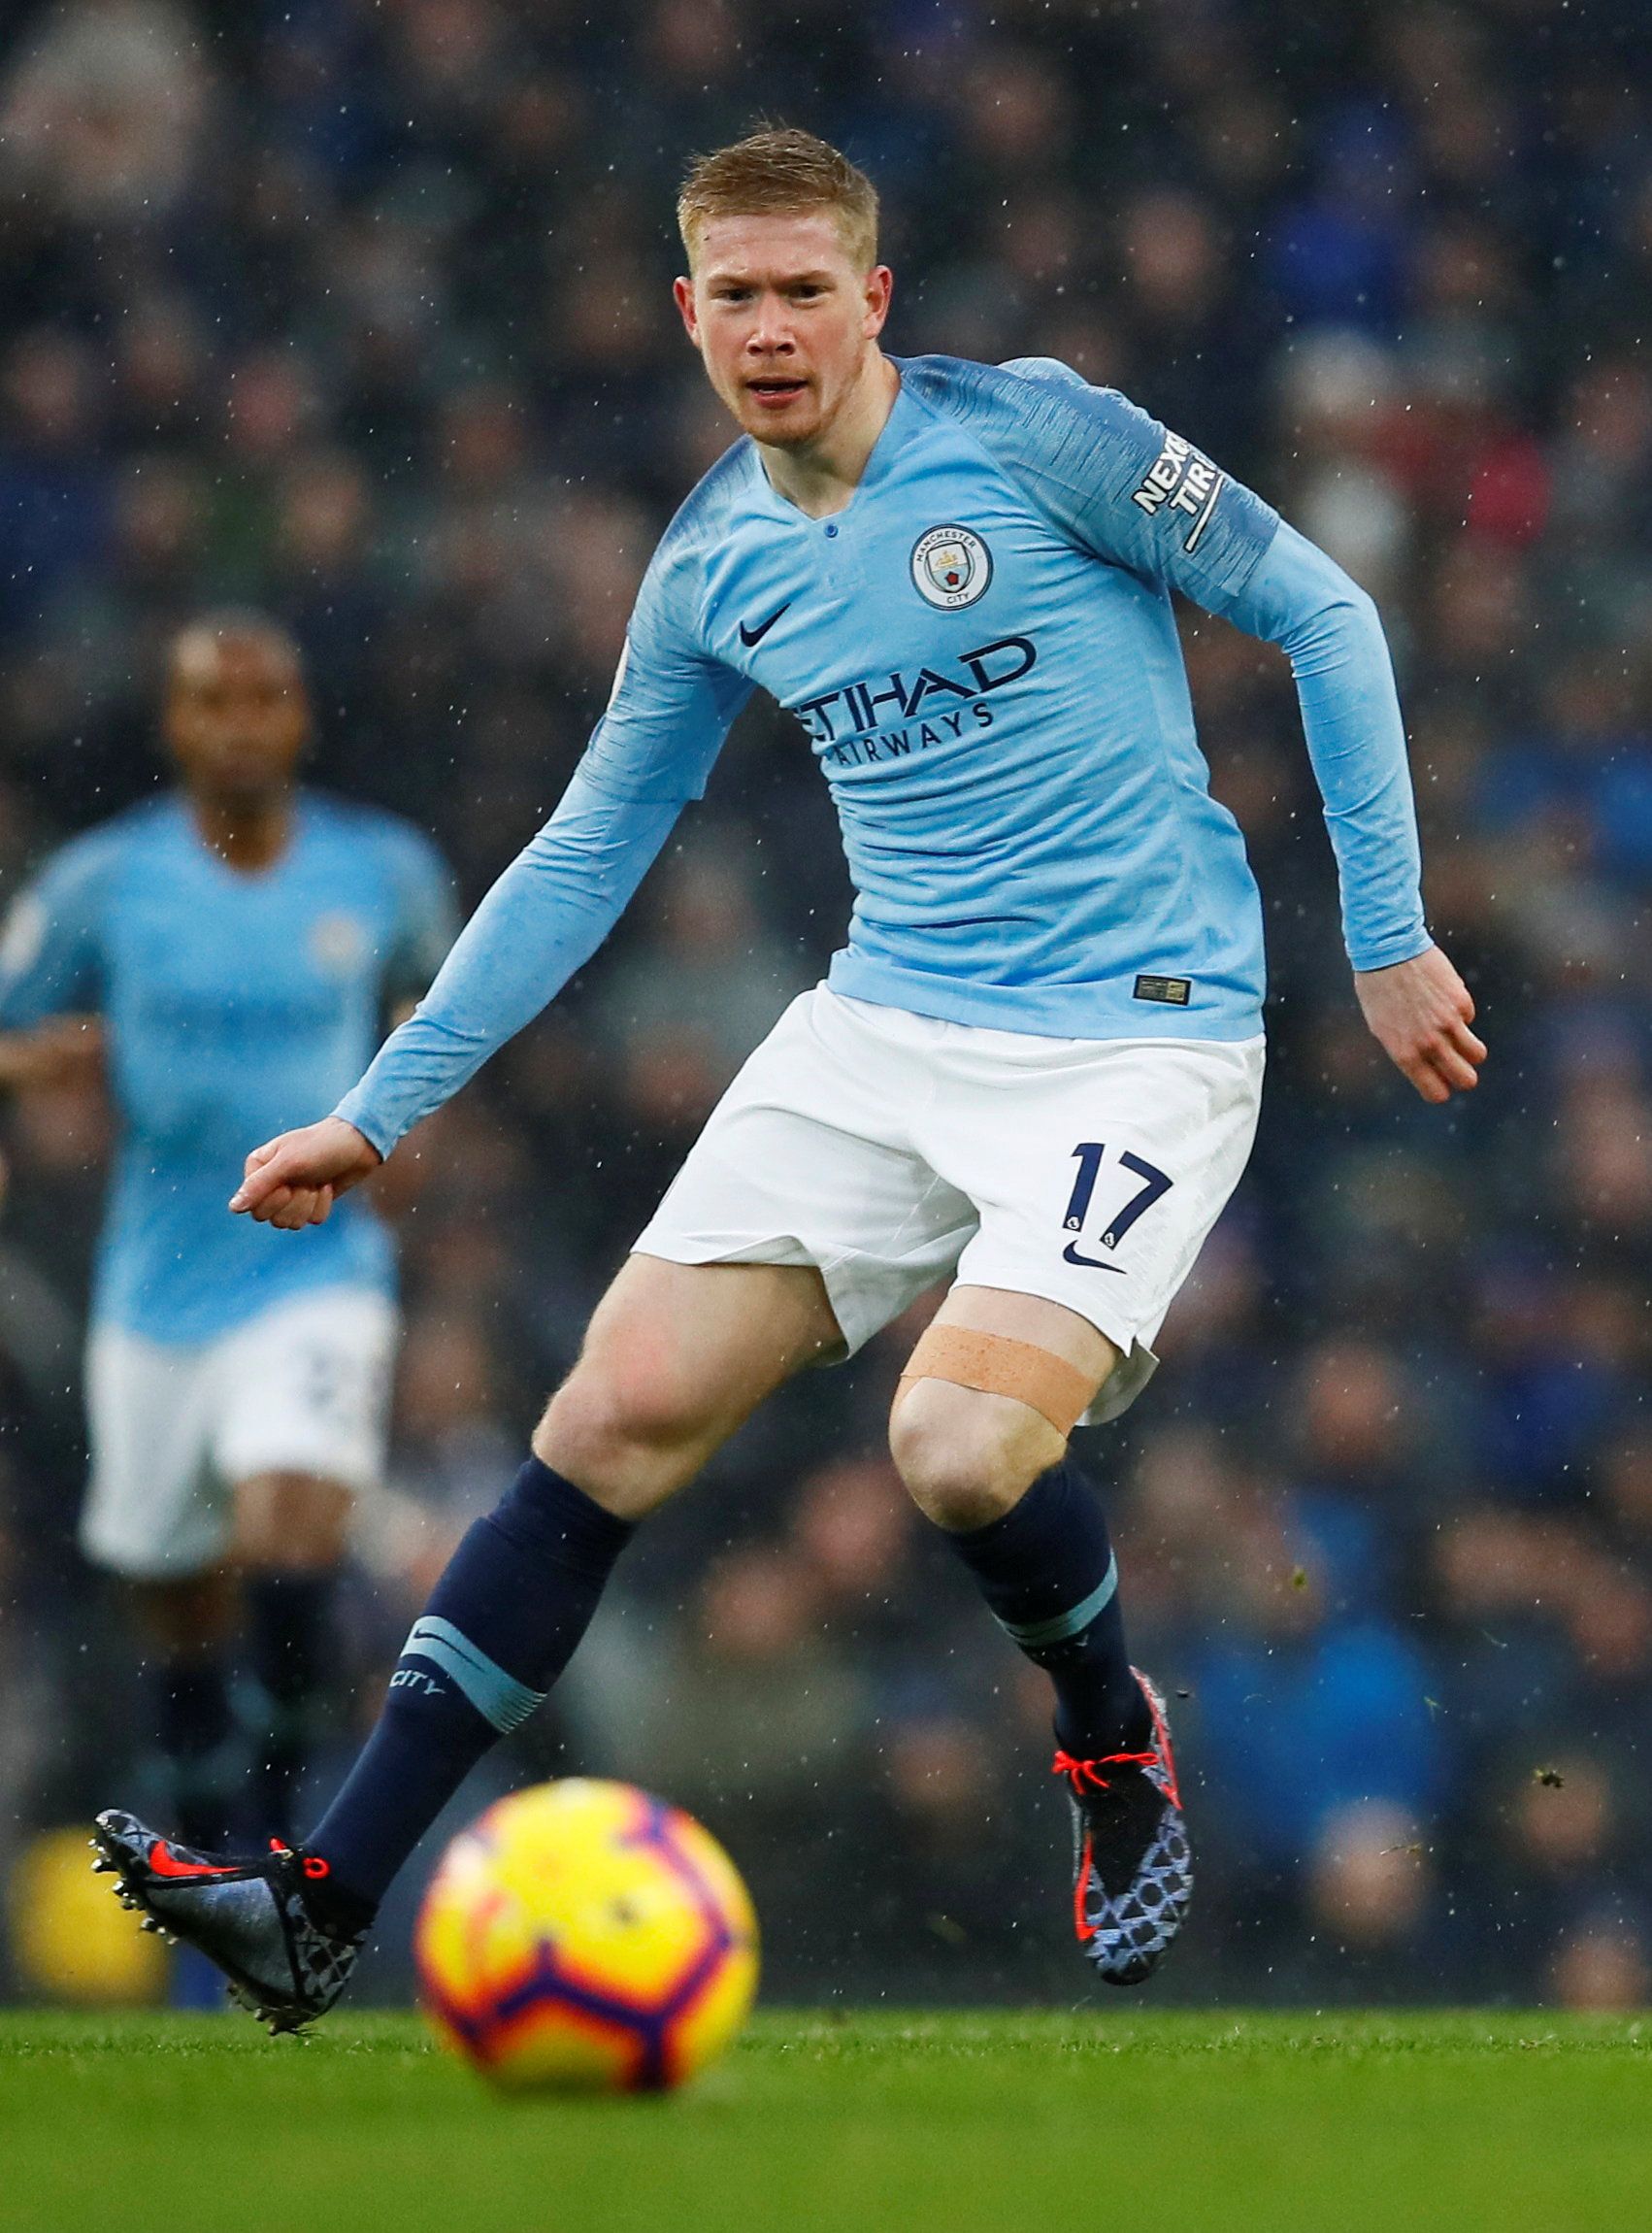 De Bruyne on the ball for Man City in 2018.